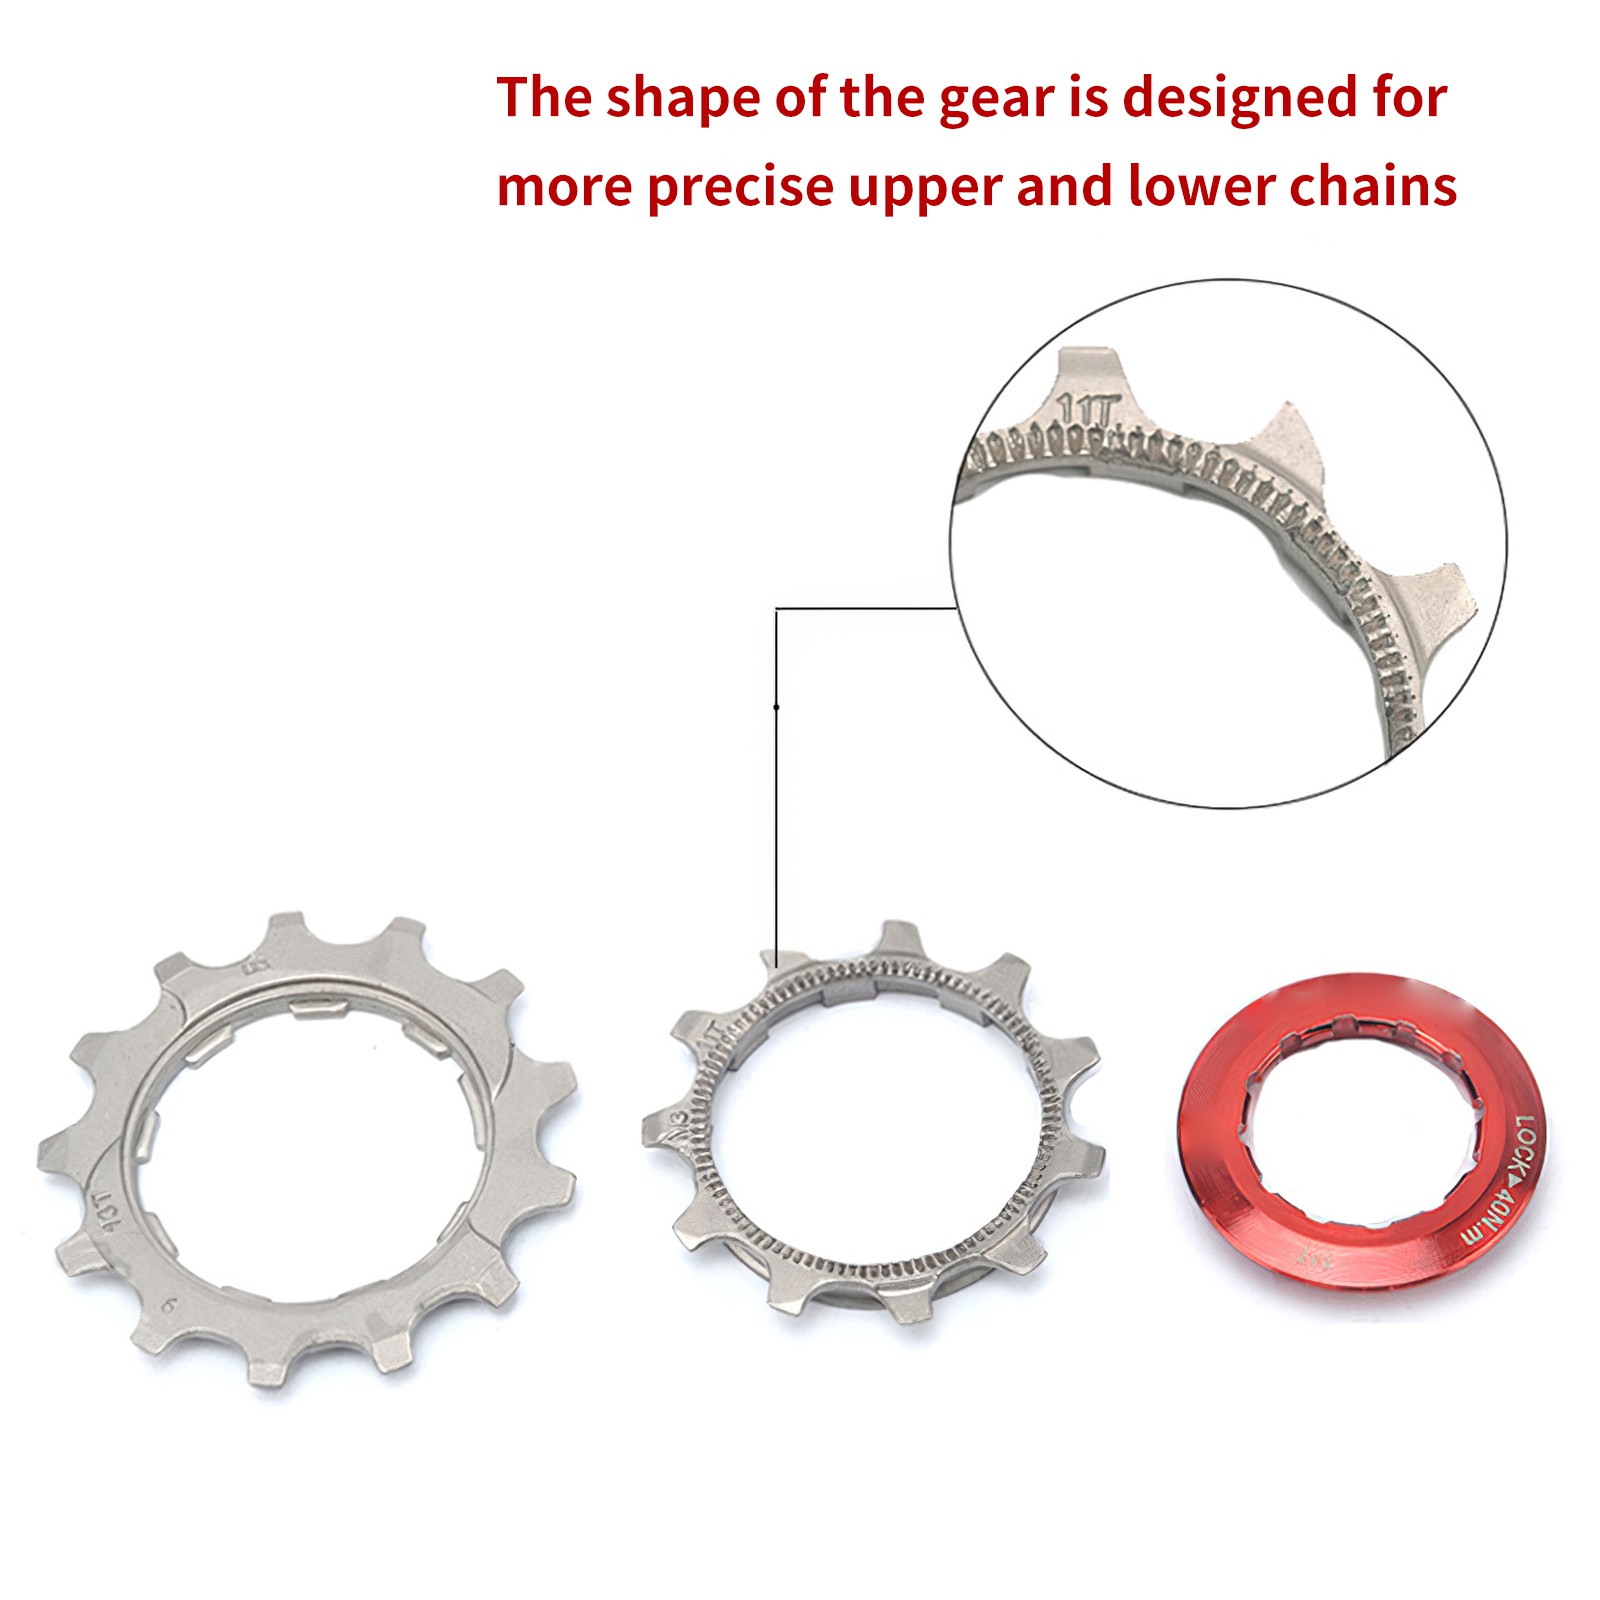 YGCX5-Bicycle Cassette 9 Speeds 11-42T Chrome-Molybdenum Steel Mountain Bike Flywheel Durable Hollow Design Golden Bicycle Parts Climbing Flywheel Cycling Accessories